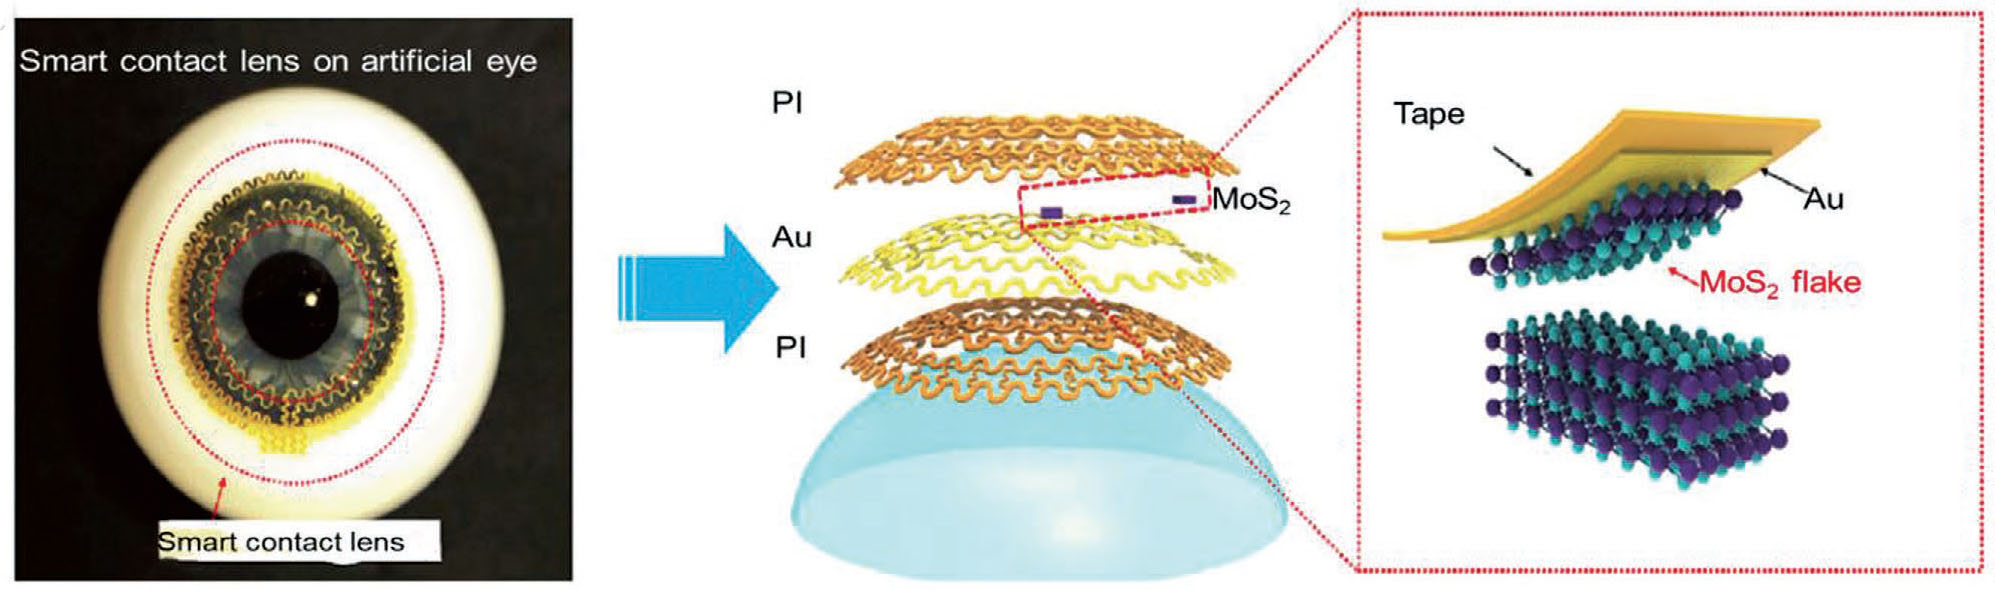 Ultrathin MoS2 transistor-based smart contact lens to monitor glucose levels